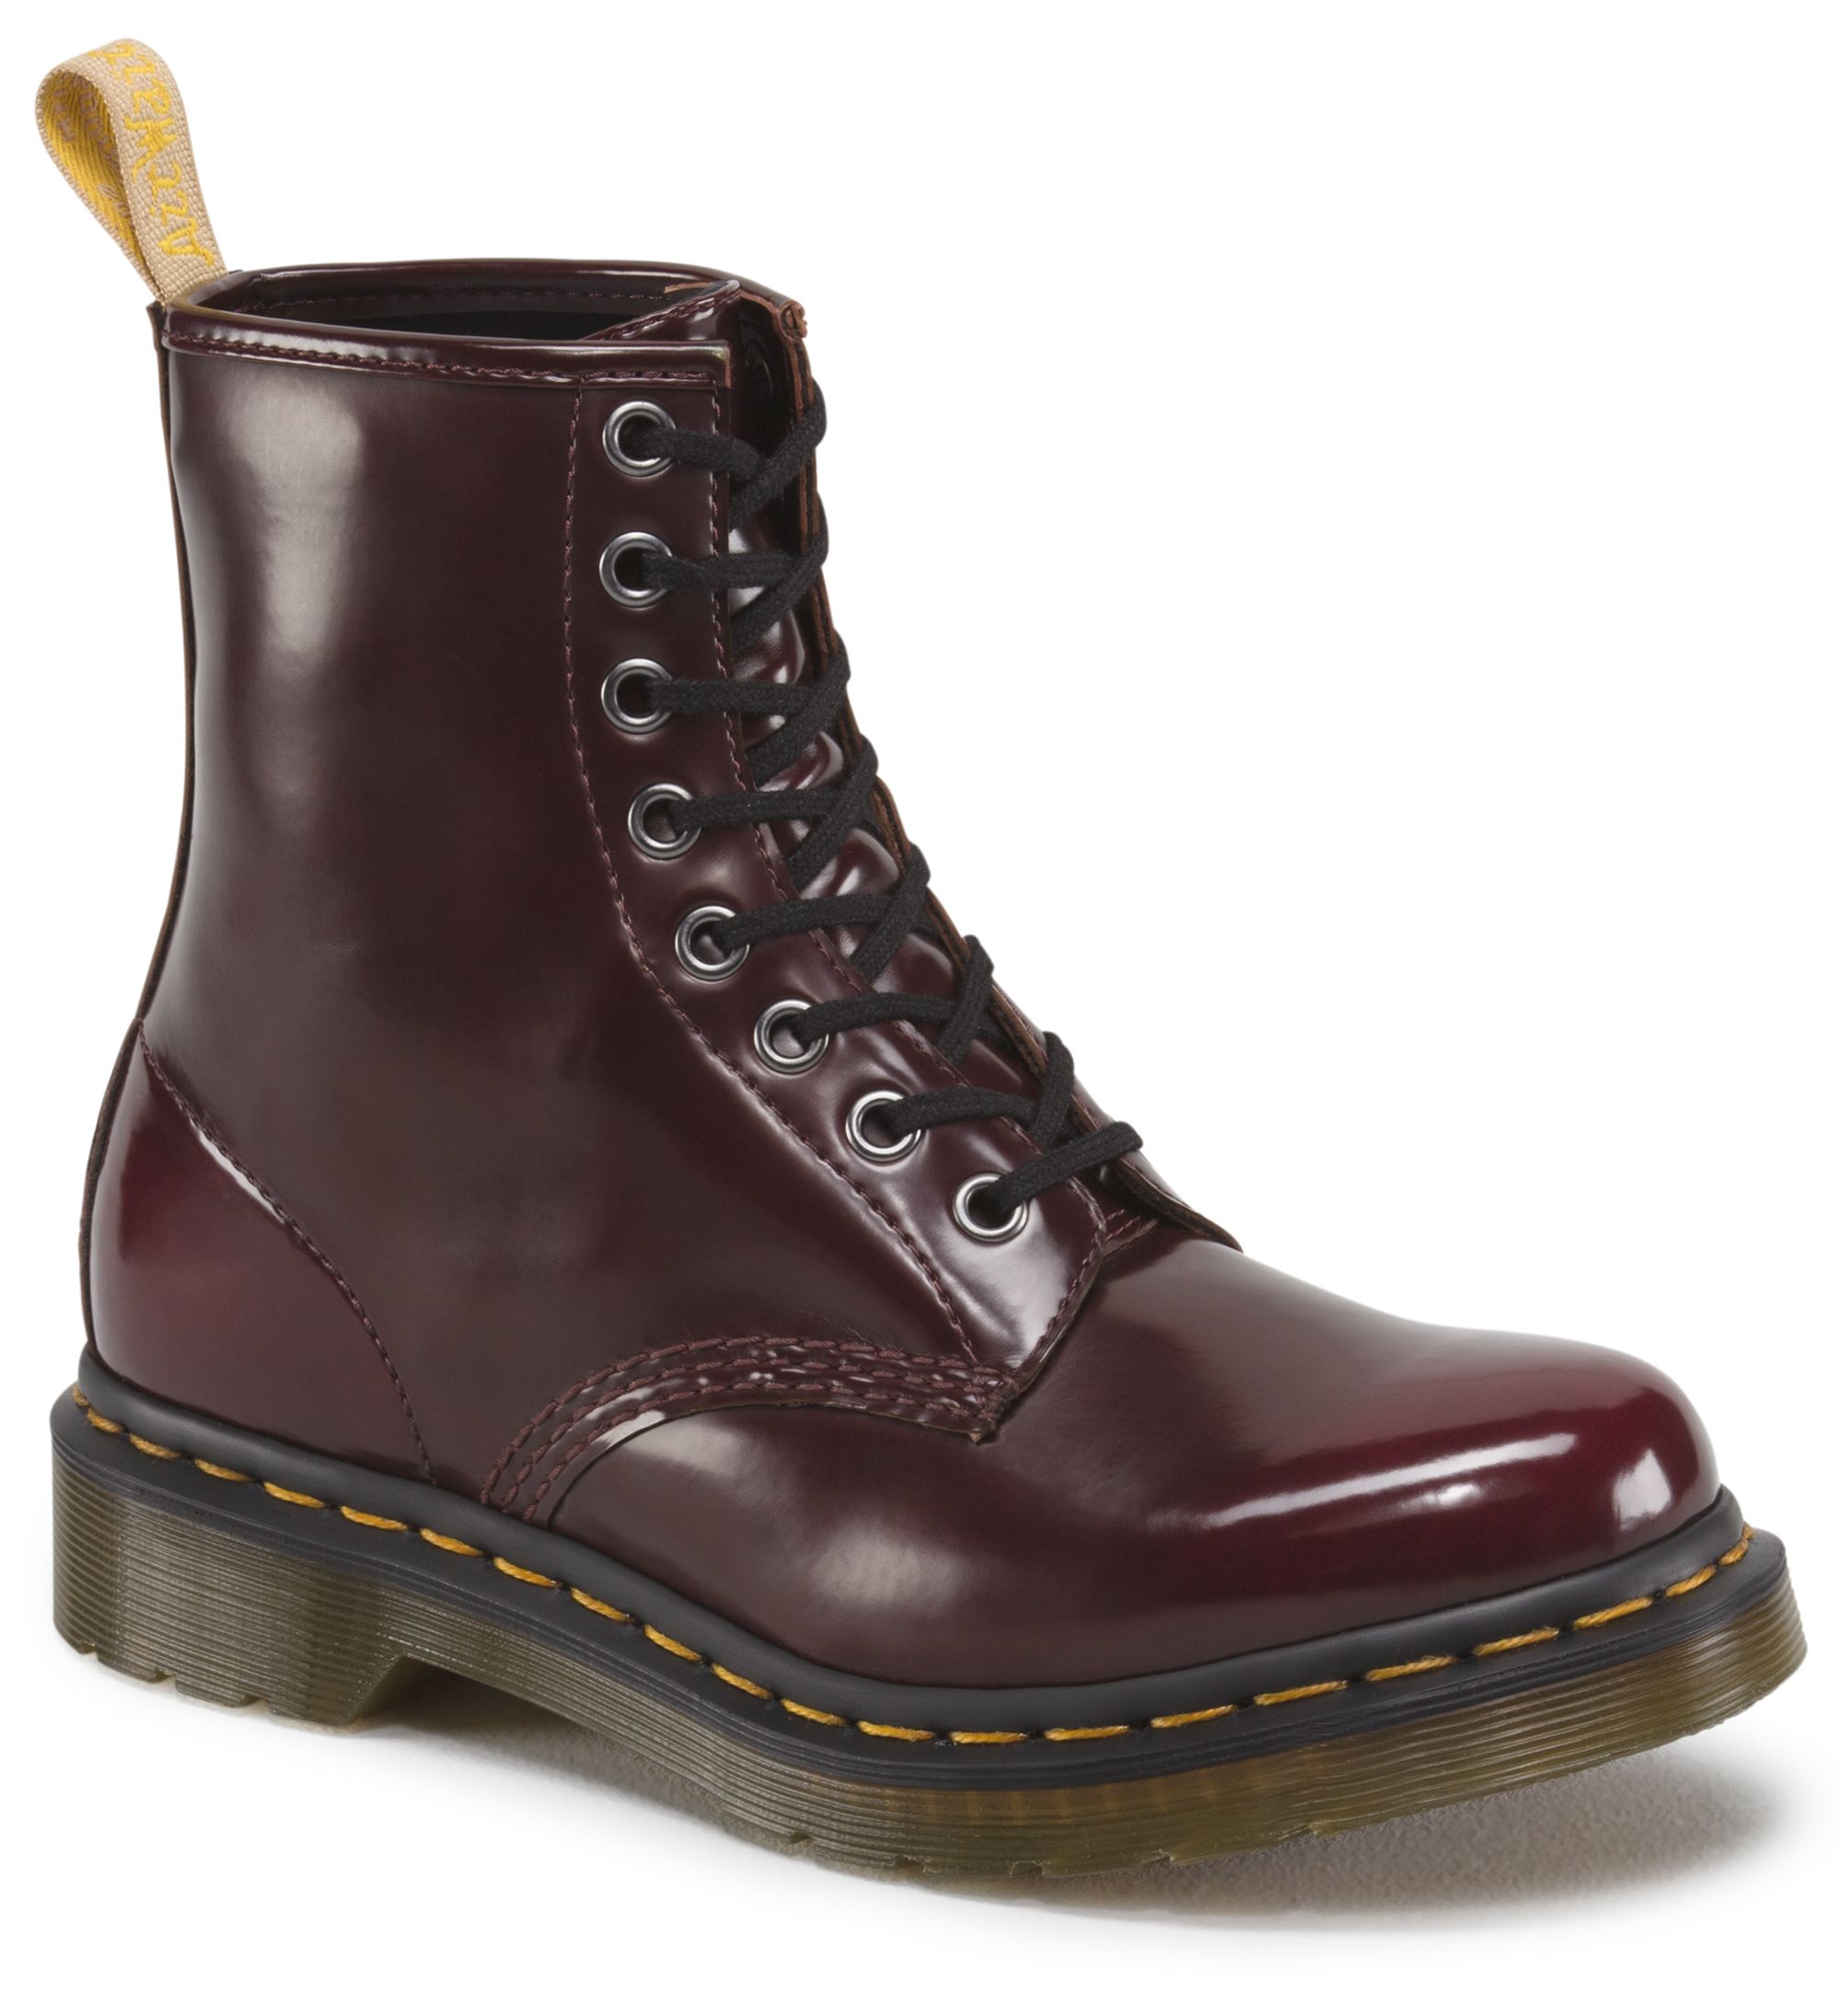 Dr Martens Vegan Boots Recalled by Airwair Due to Chemical Exposure 